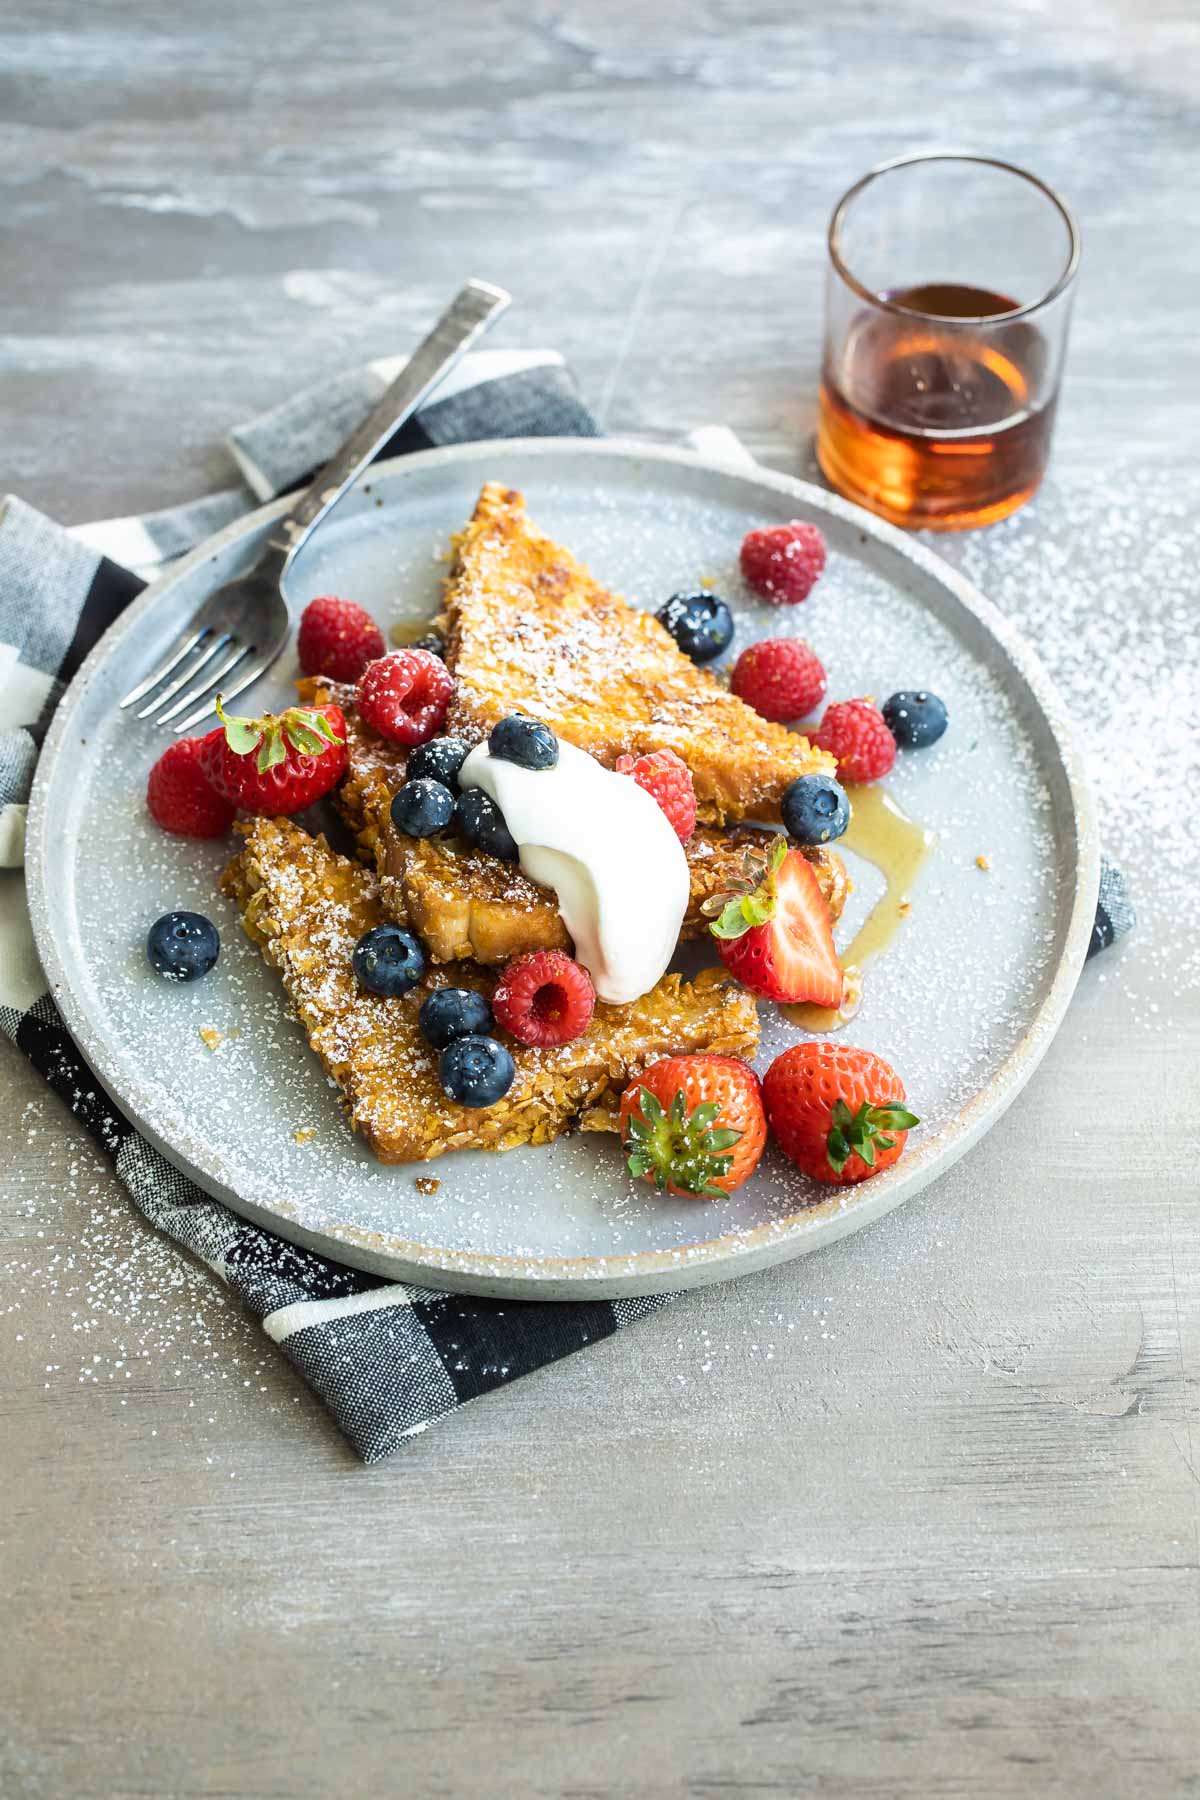 A plate of cornflake crusted french toast with fruit.